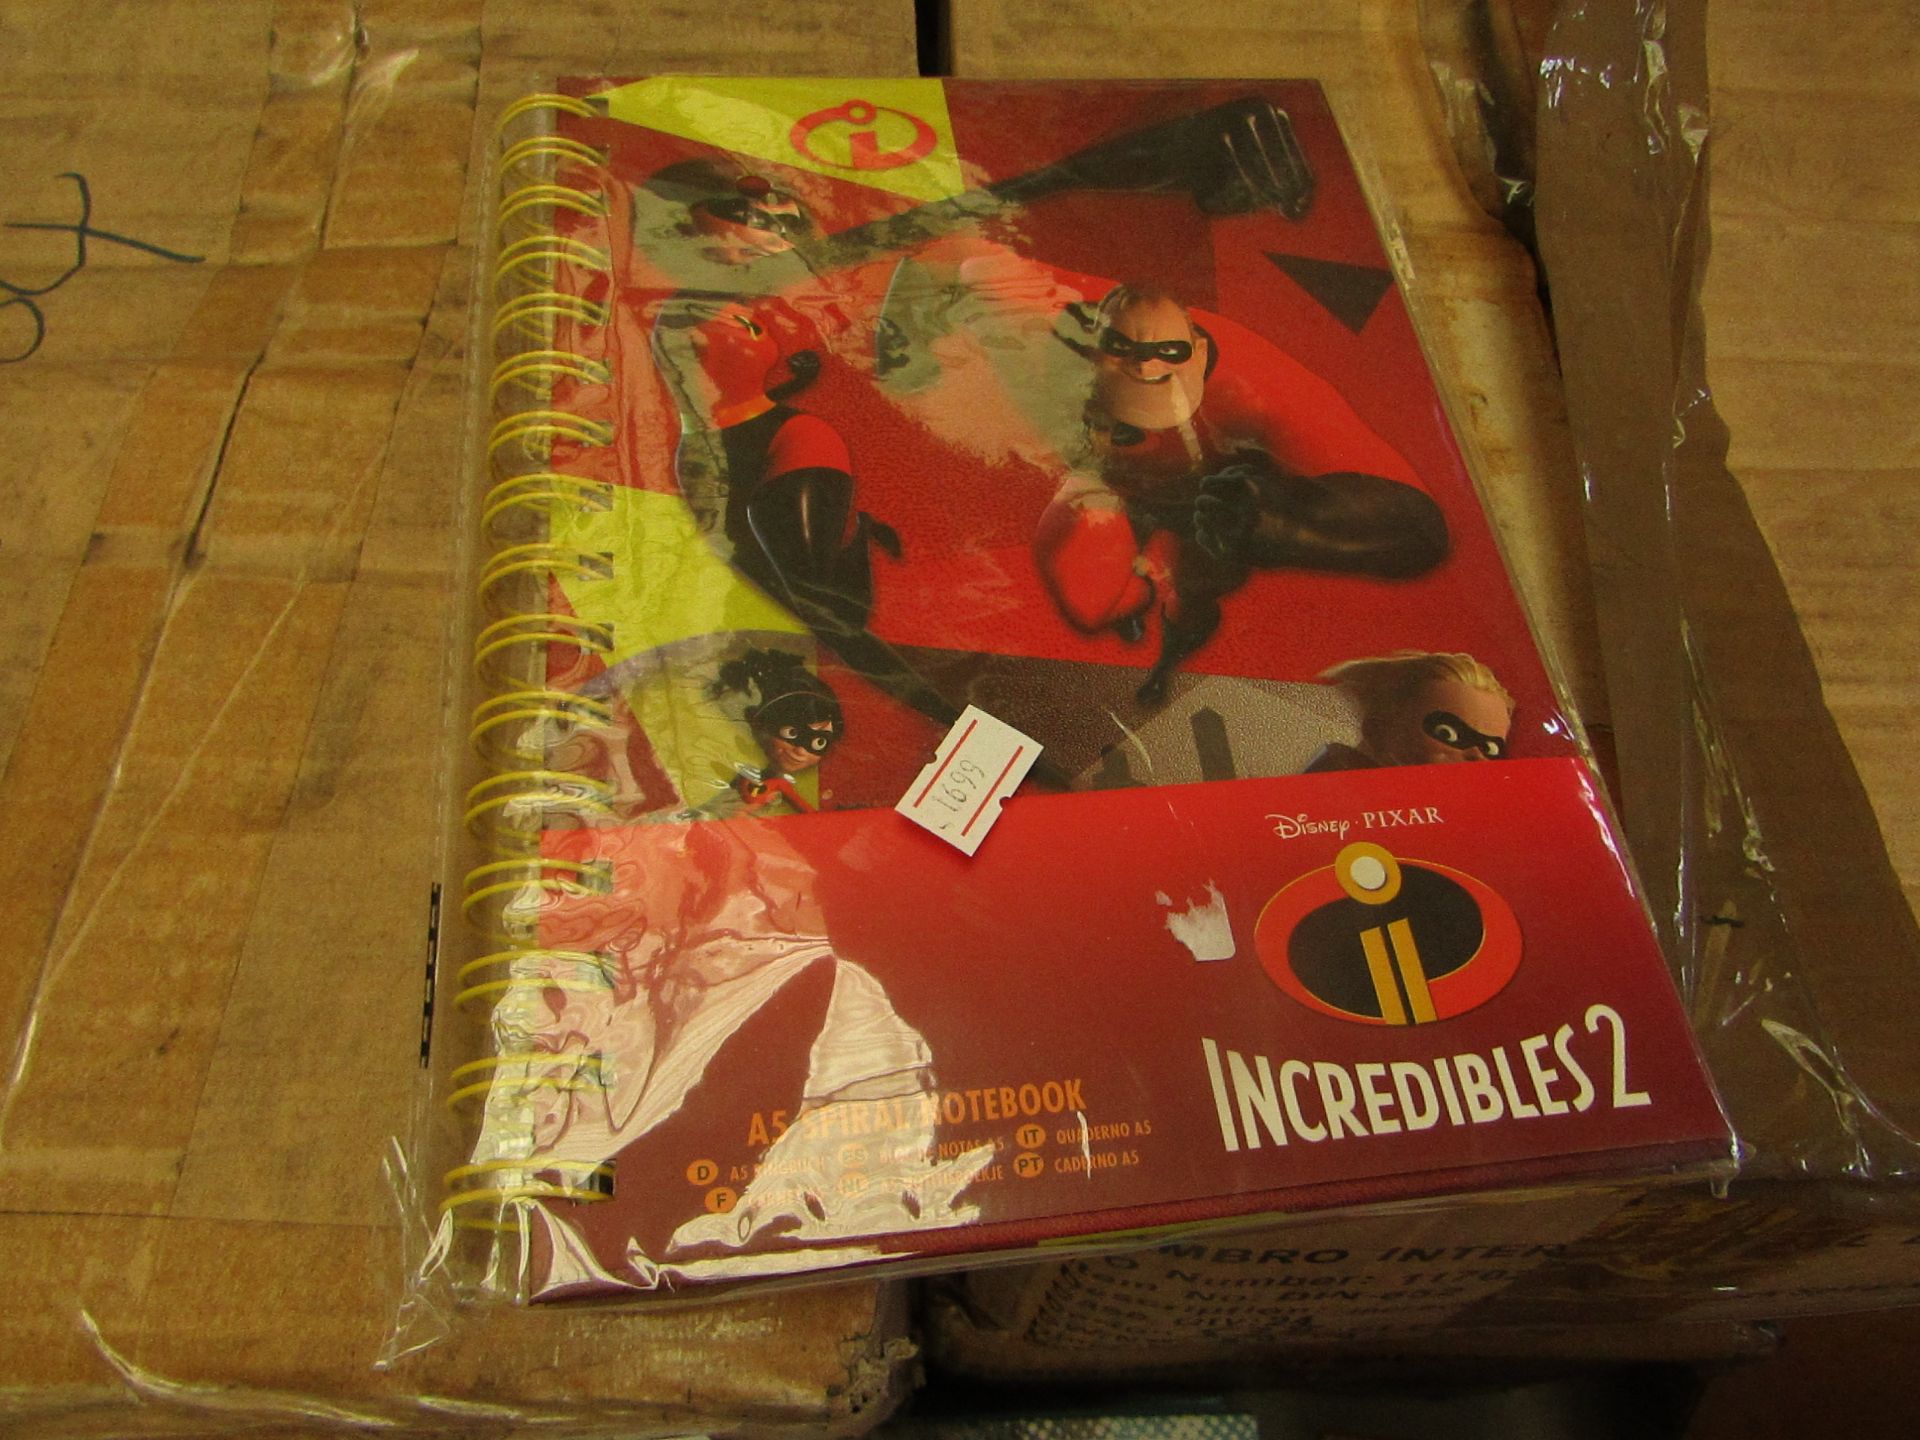 24x Incredibles A5 hardback spiral notebook, new and boxed.